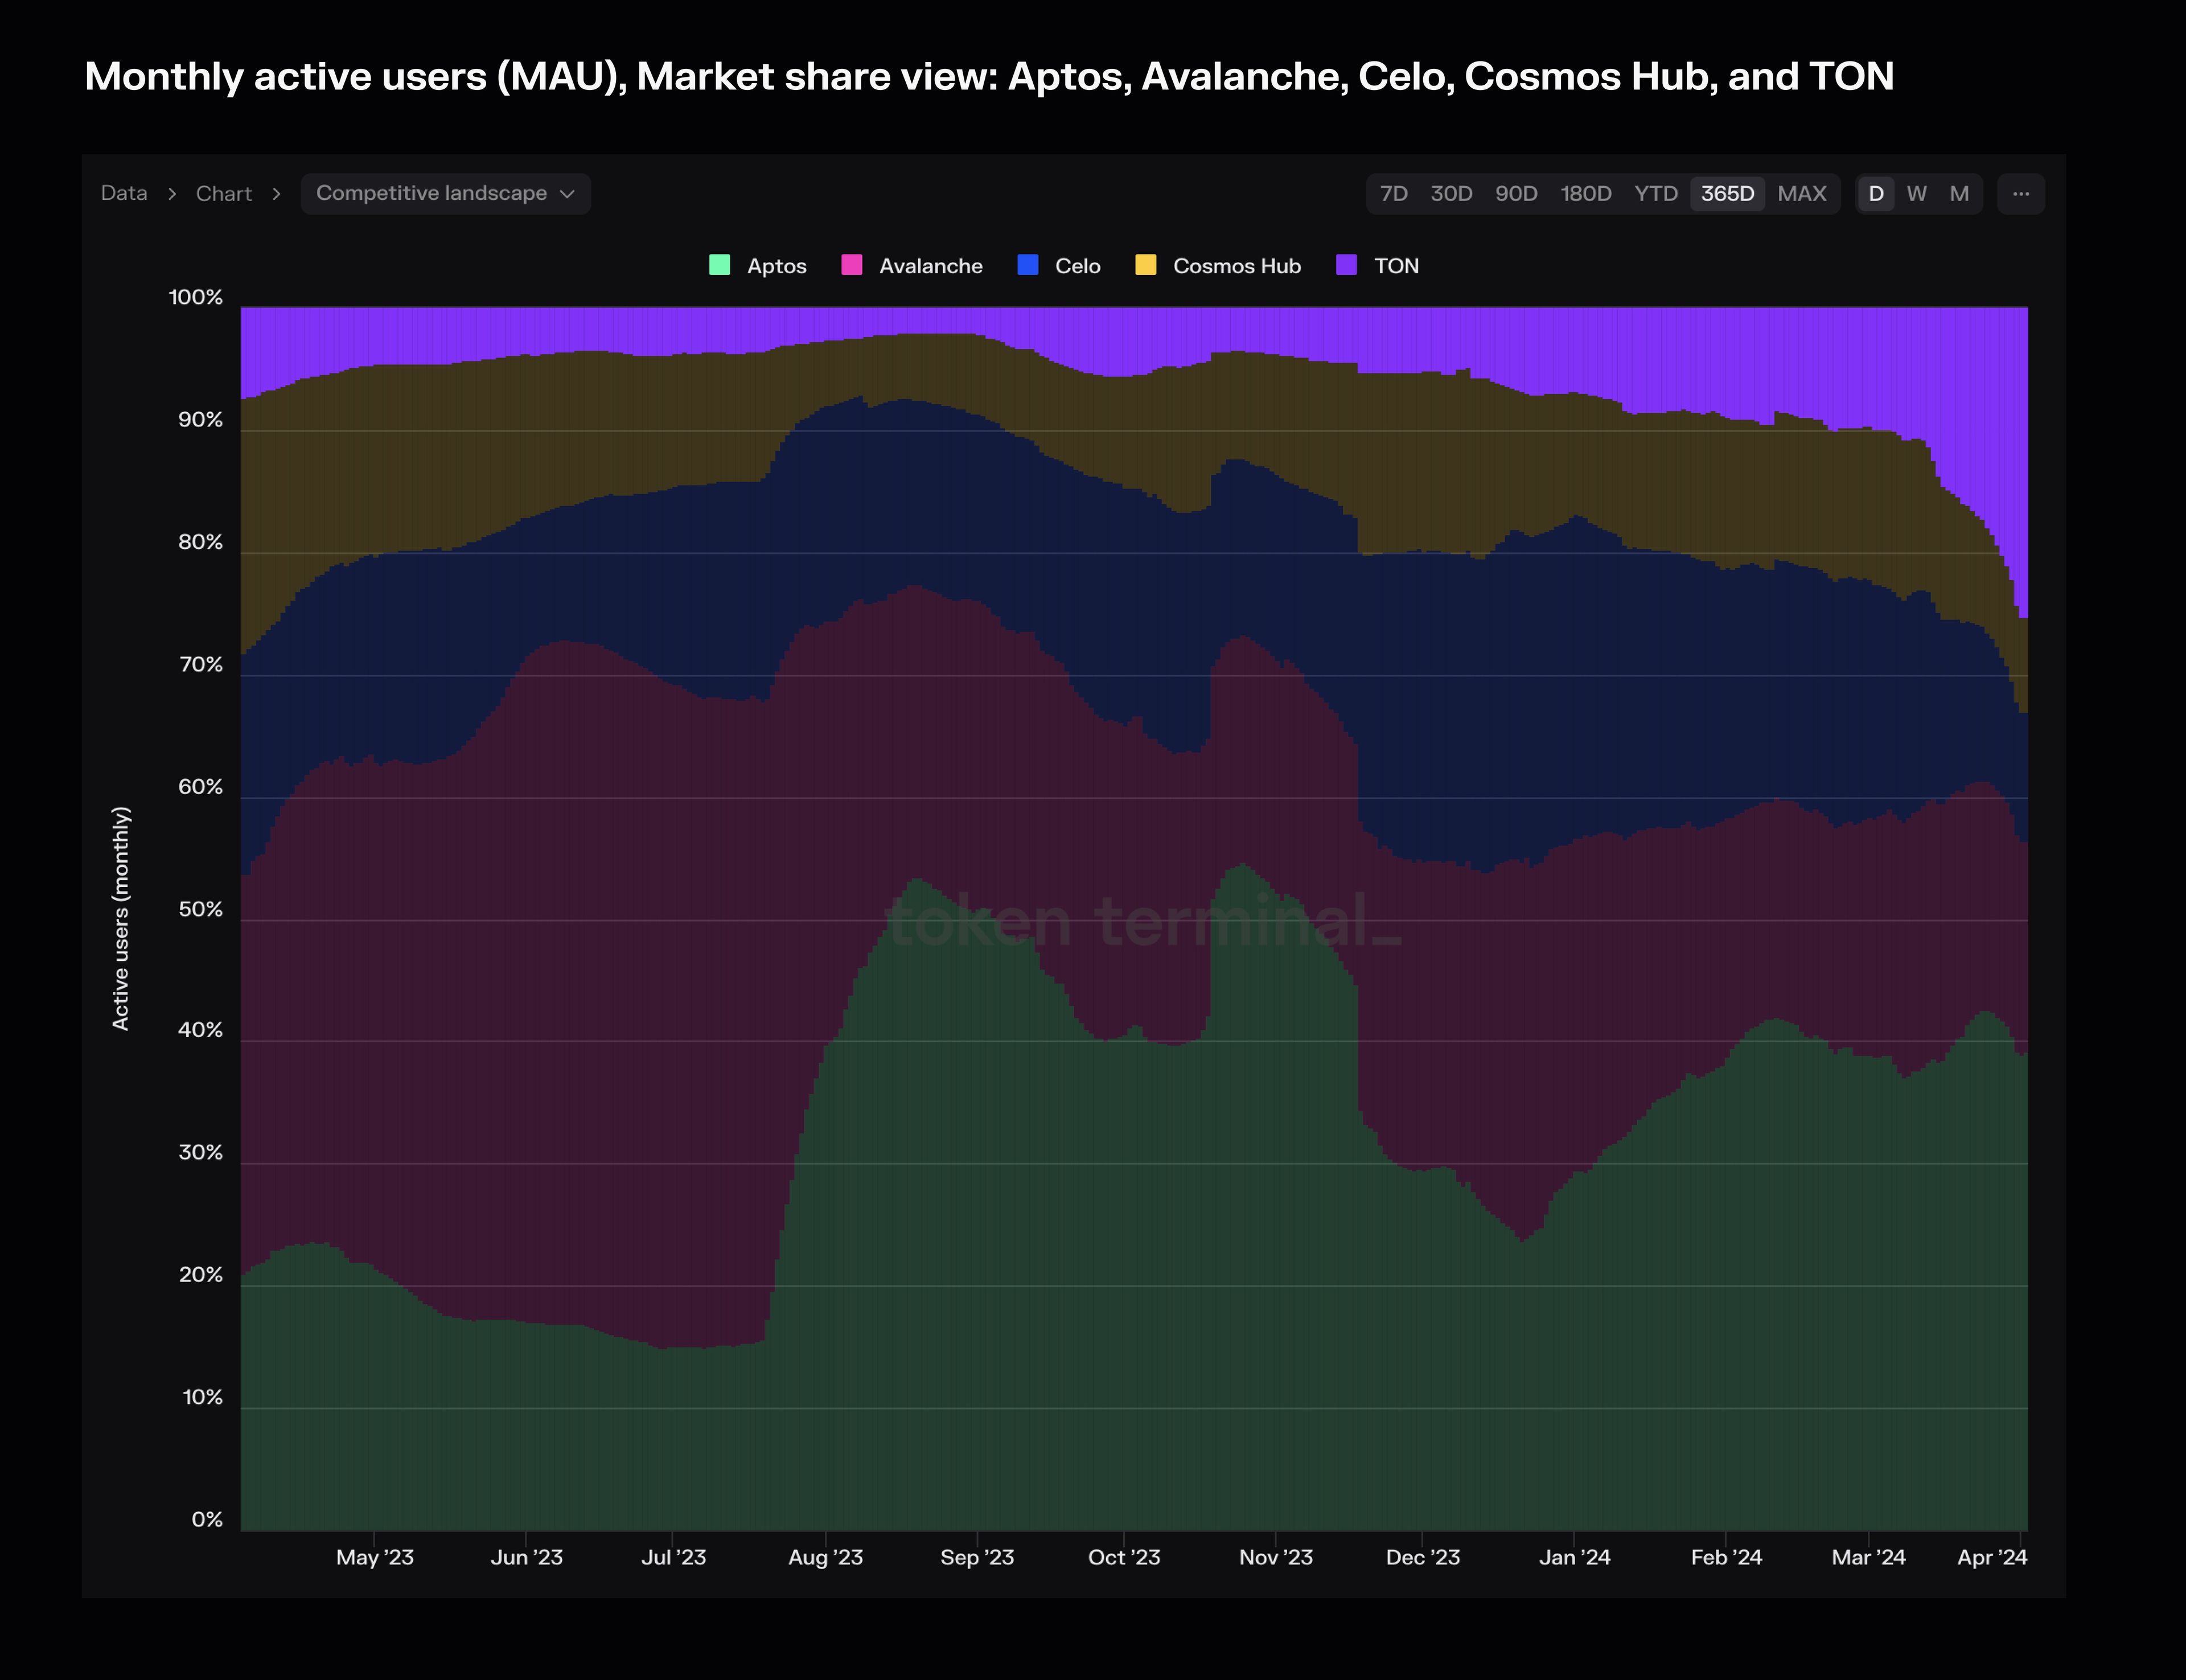 Monthly active users (MAUs) for TON highlighted on our Market sector dashboard (market share view).